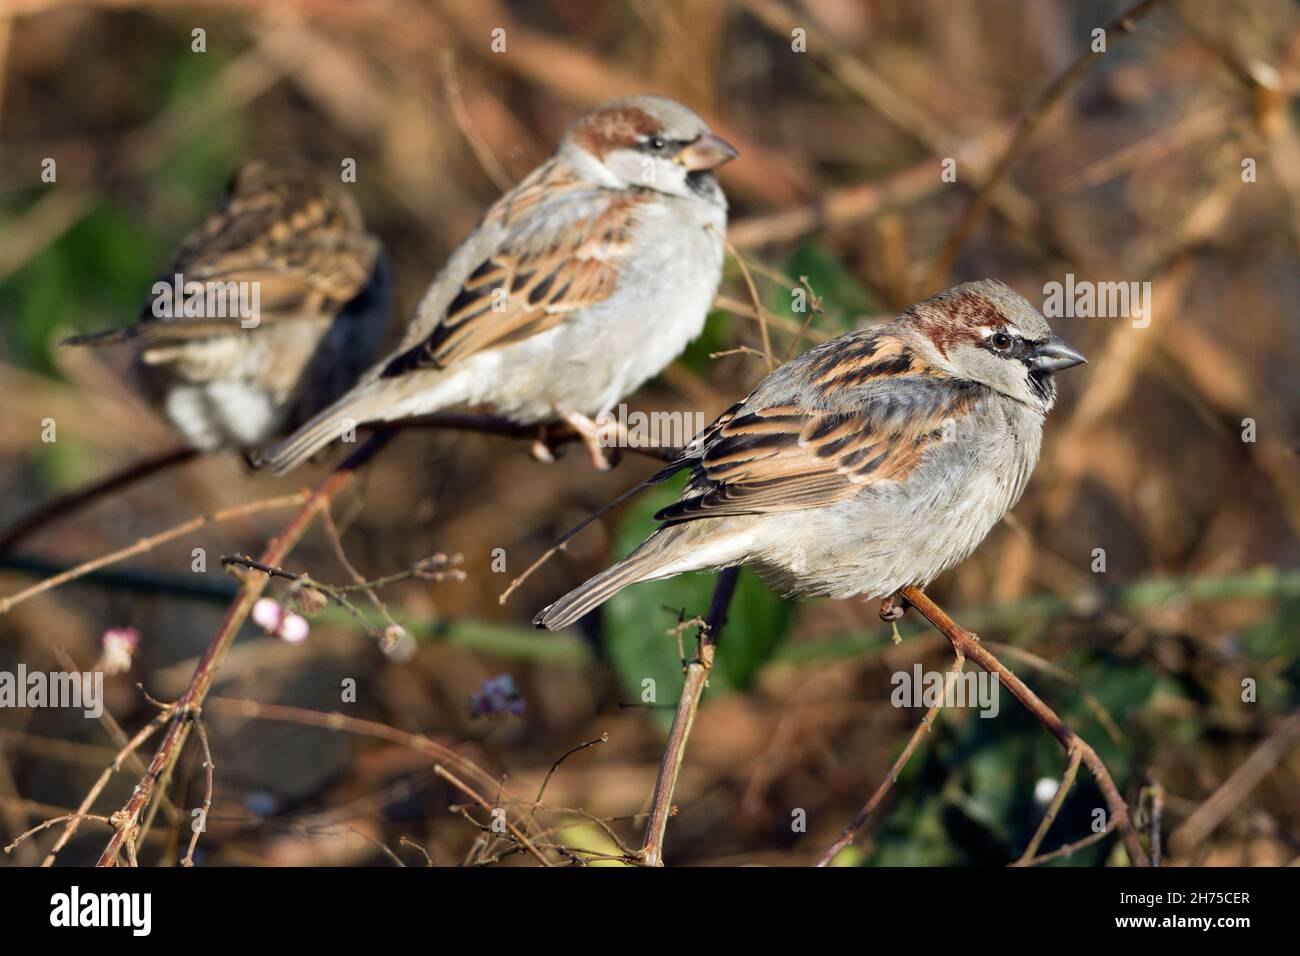 House sparrows, perched on twig, two males and a female, Lower Saxony, Germany Stock Photo